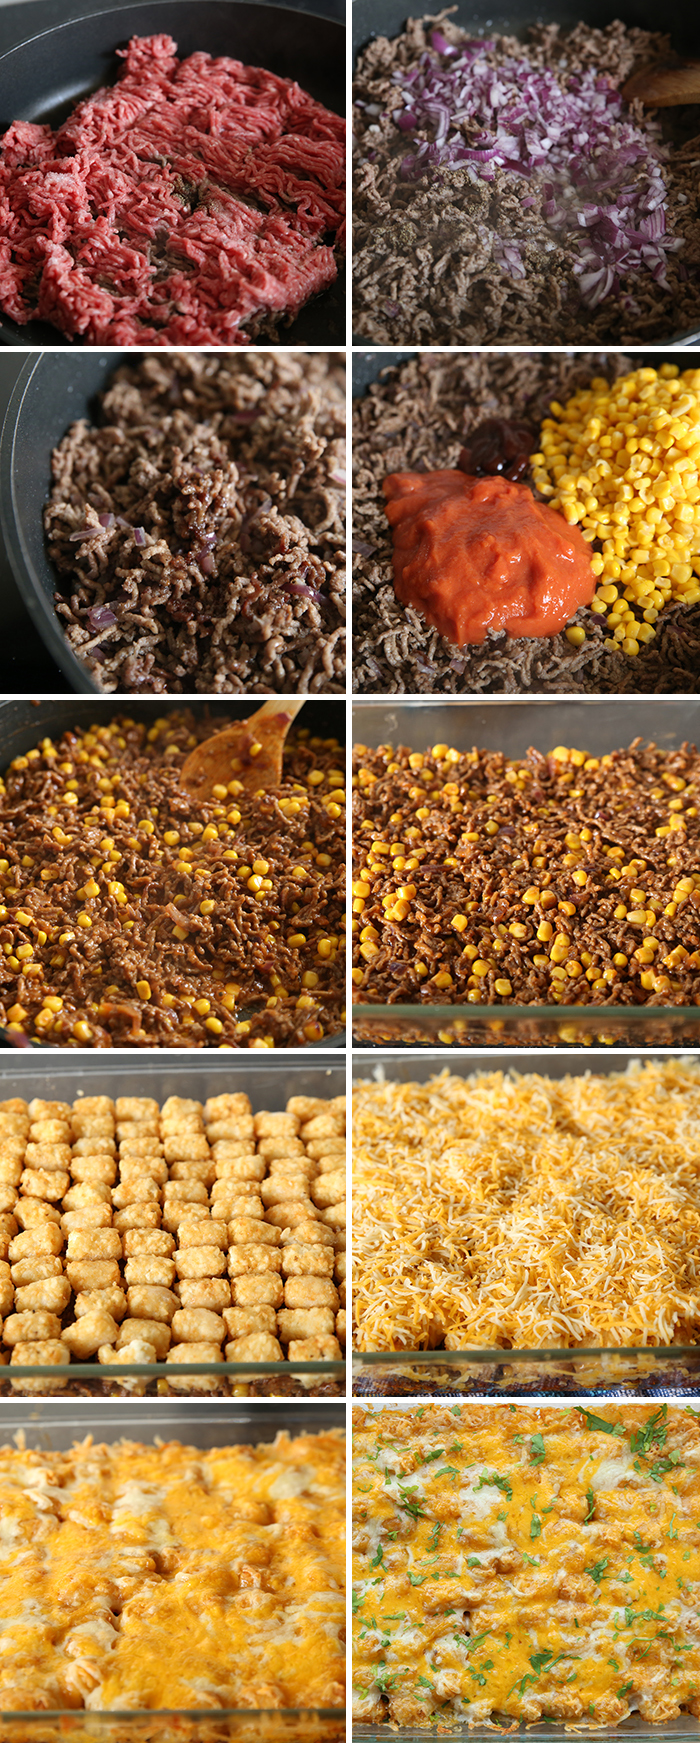 Step-by-step photos on how to make Cowboy Casserole.